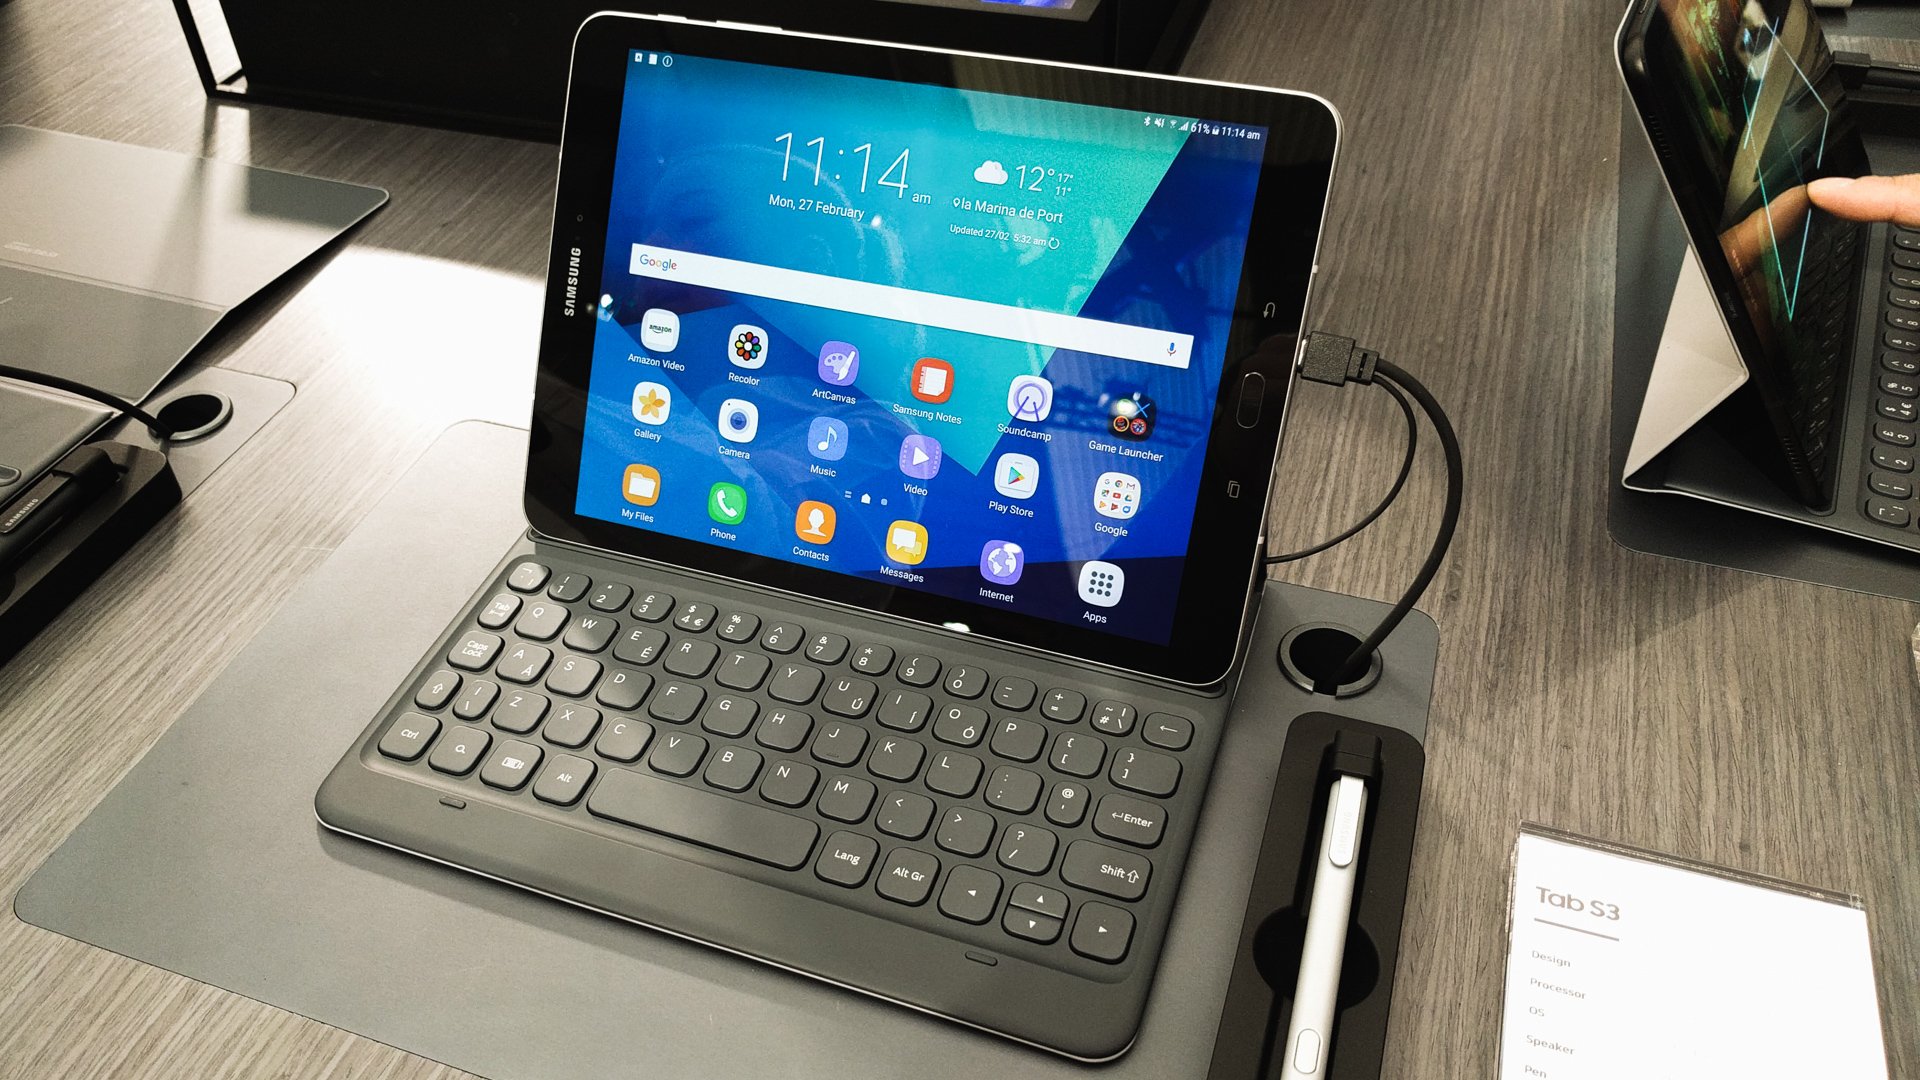 10 tips to make the Samsung Galaxy Tab S3 the best it can be | CIO Africa